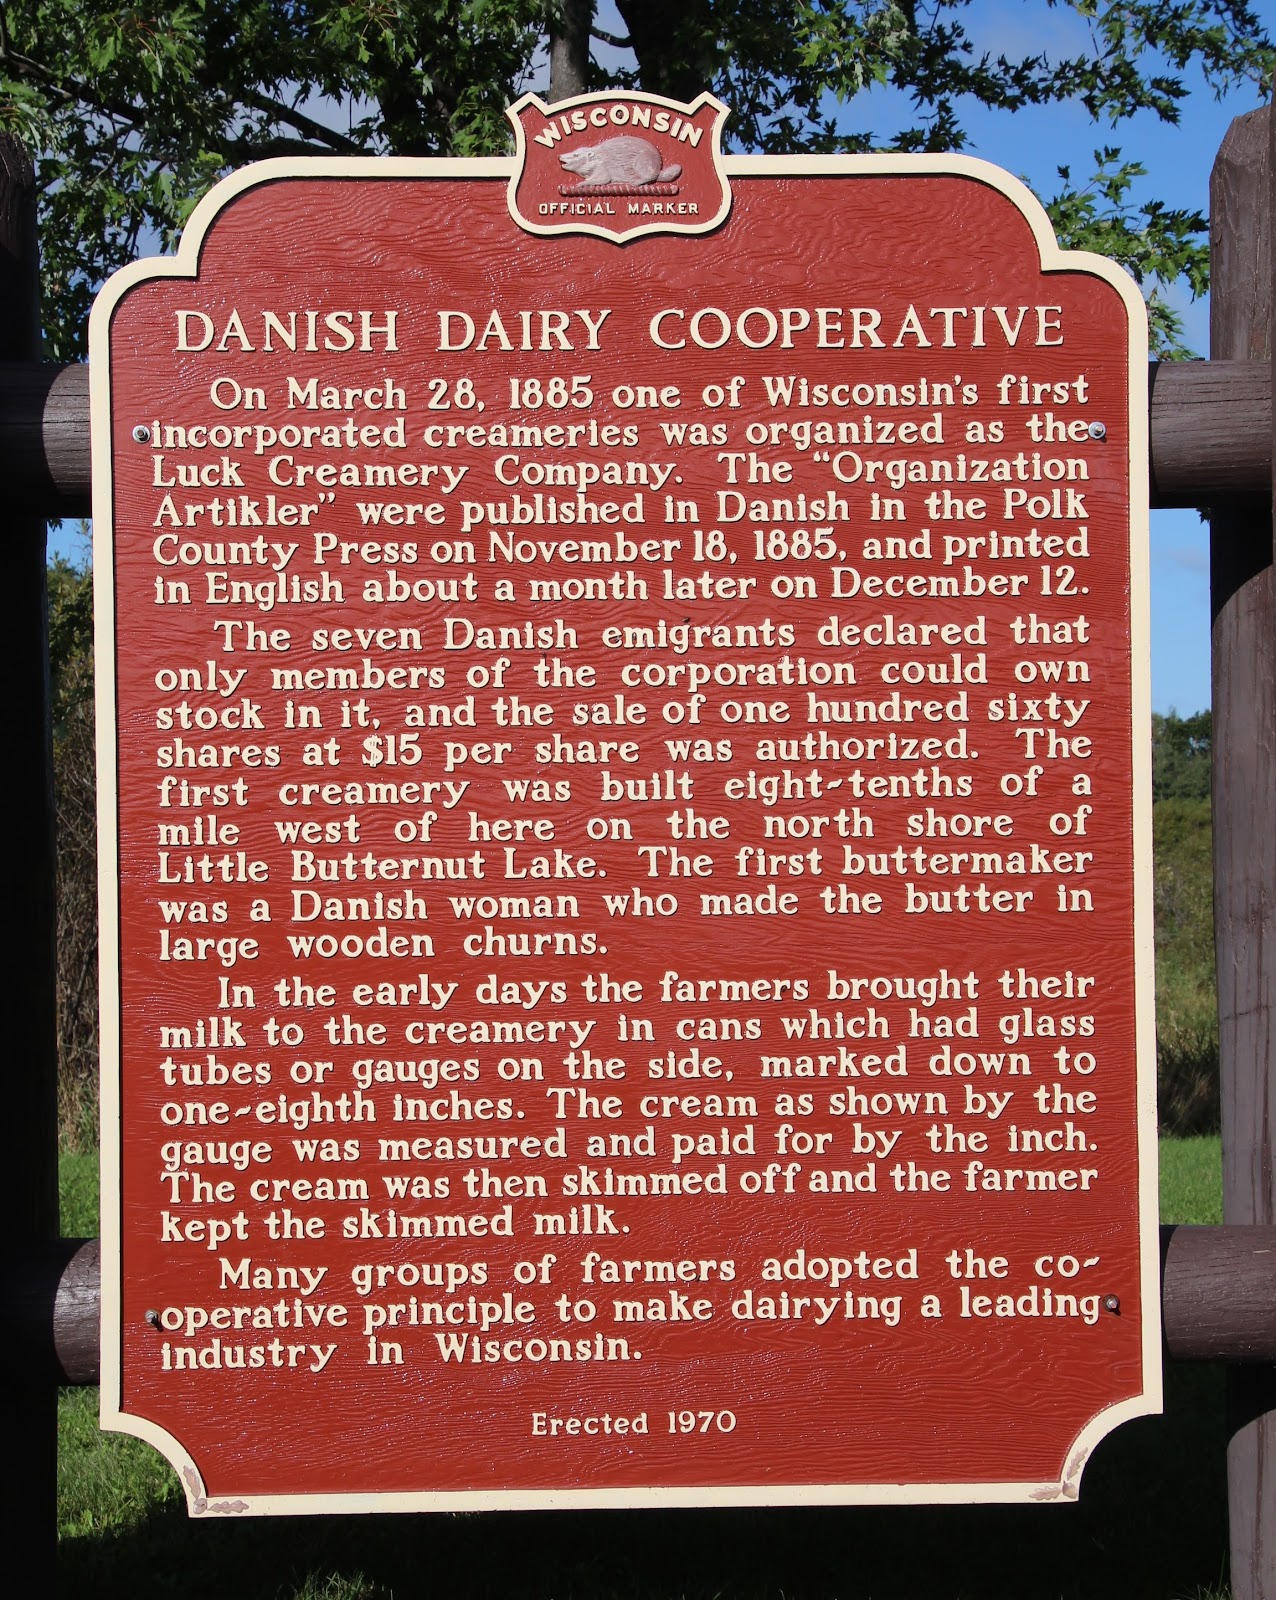 Historical sign detailing the history of the first Wisconsin dairy cooperative.